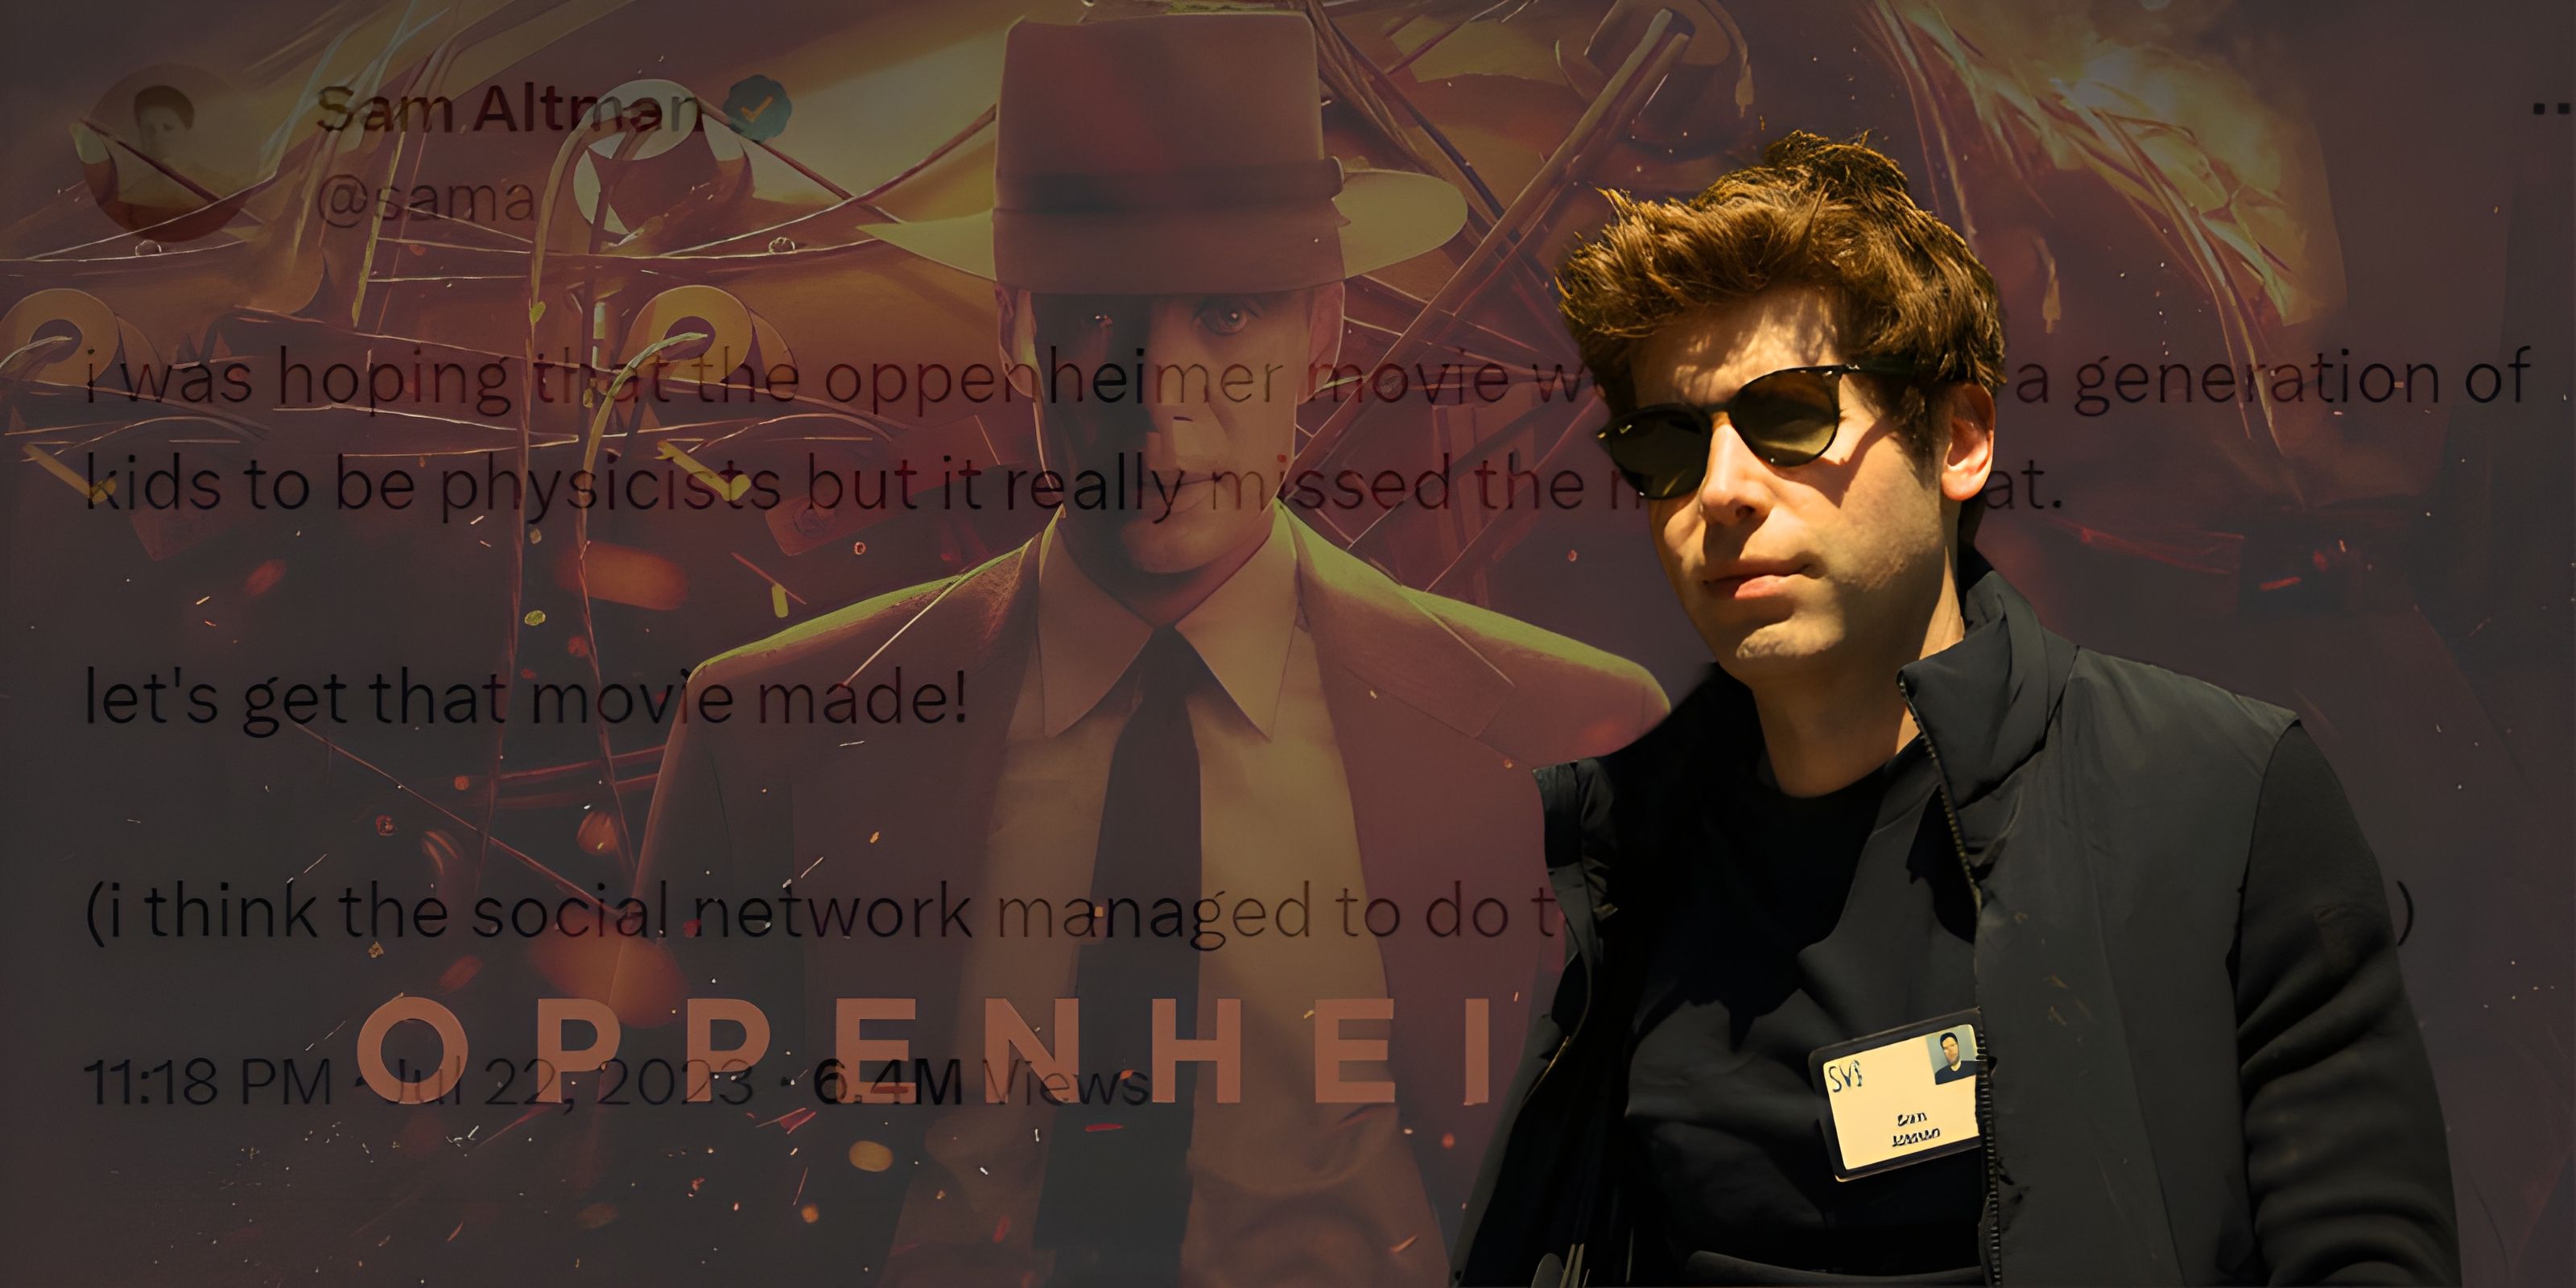 How Did 'Oppenheimer' Fail to Inspire?:  OpenAI's CEO Sam Altman tweeted 